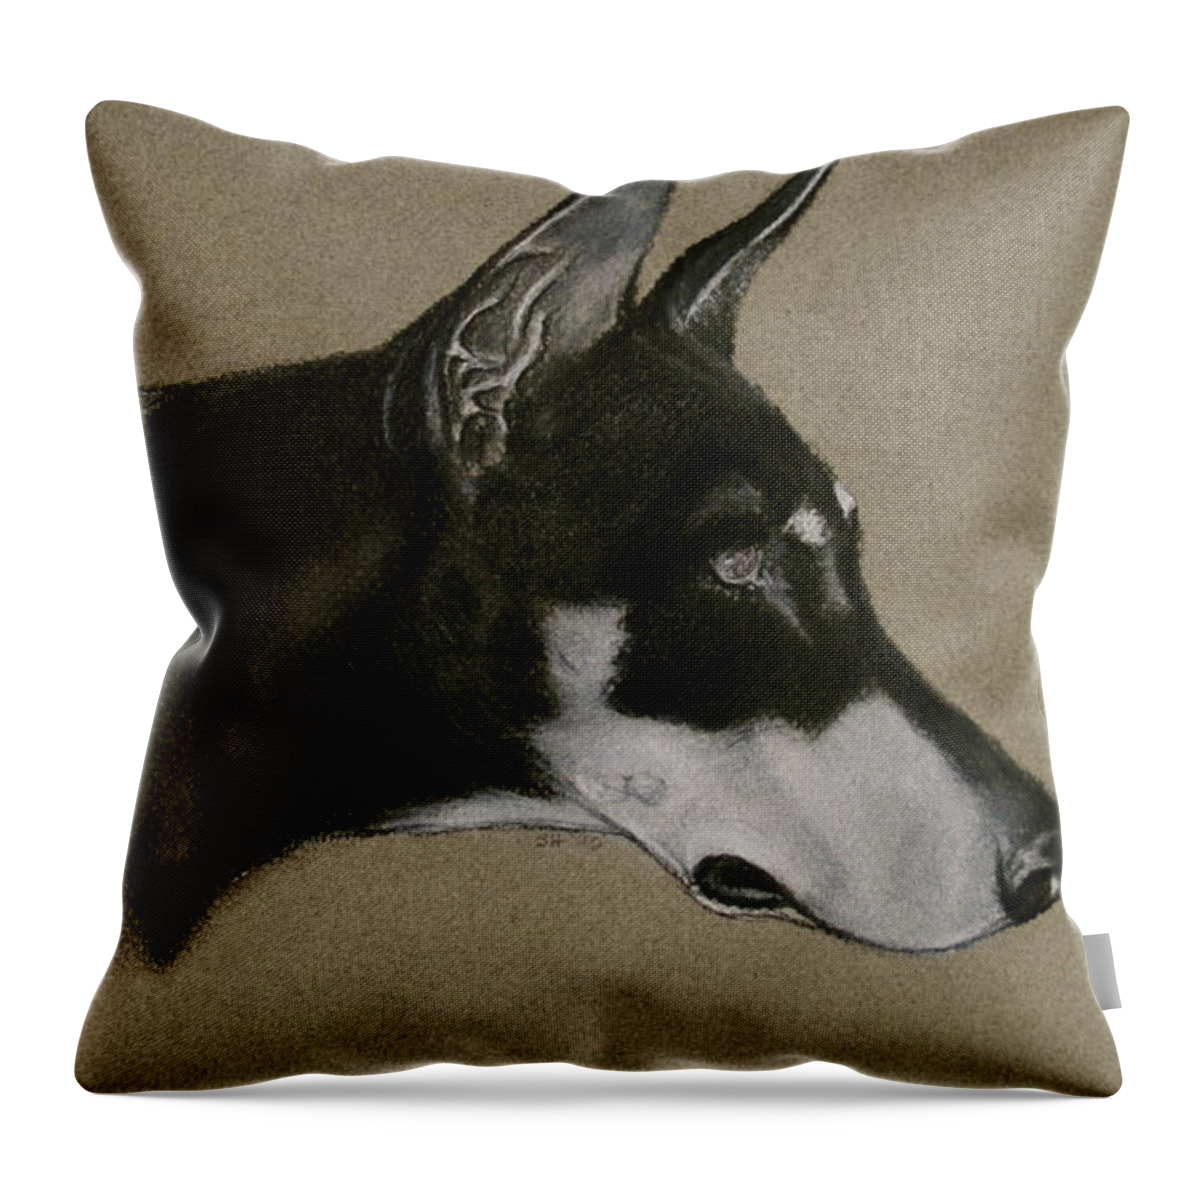 Dobe Throw Pillow featuring the drawing Doberman by Susan Herber